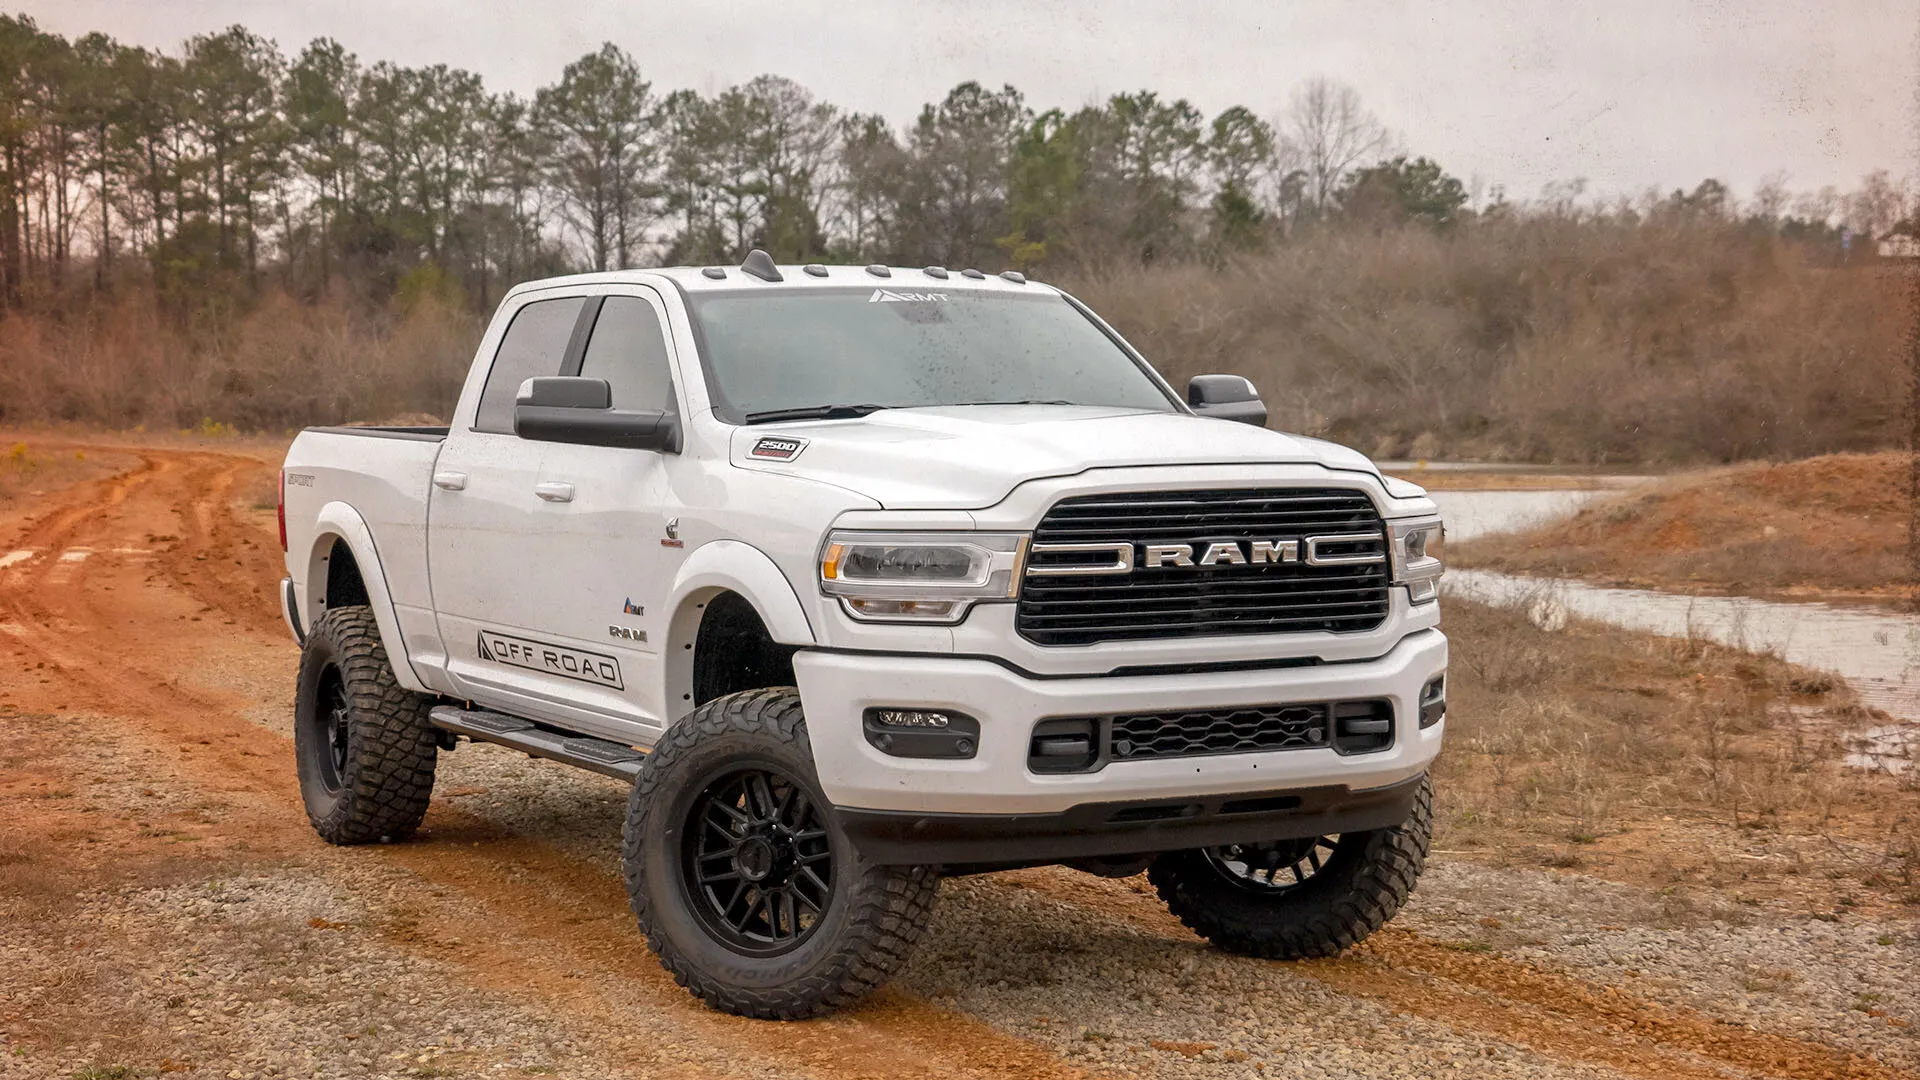 Lifted RAM truck off-roading